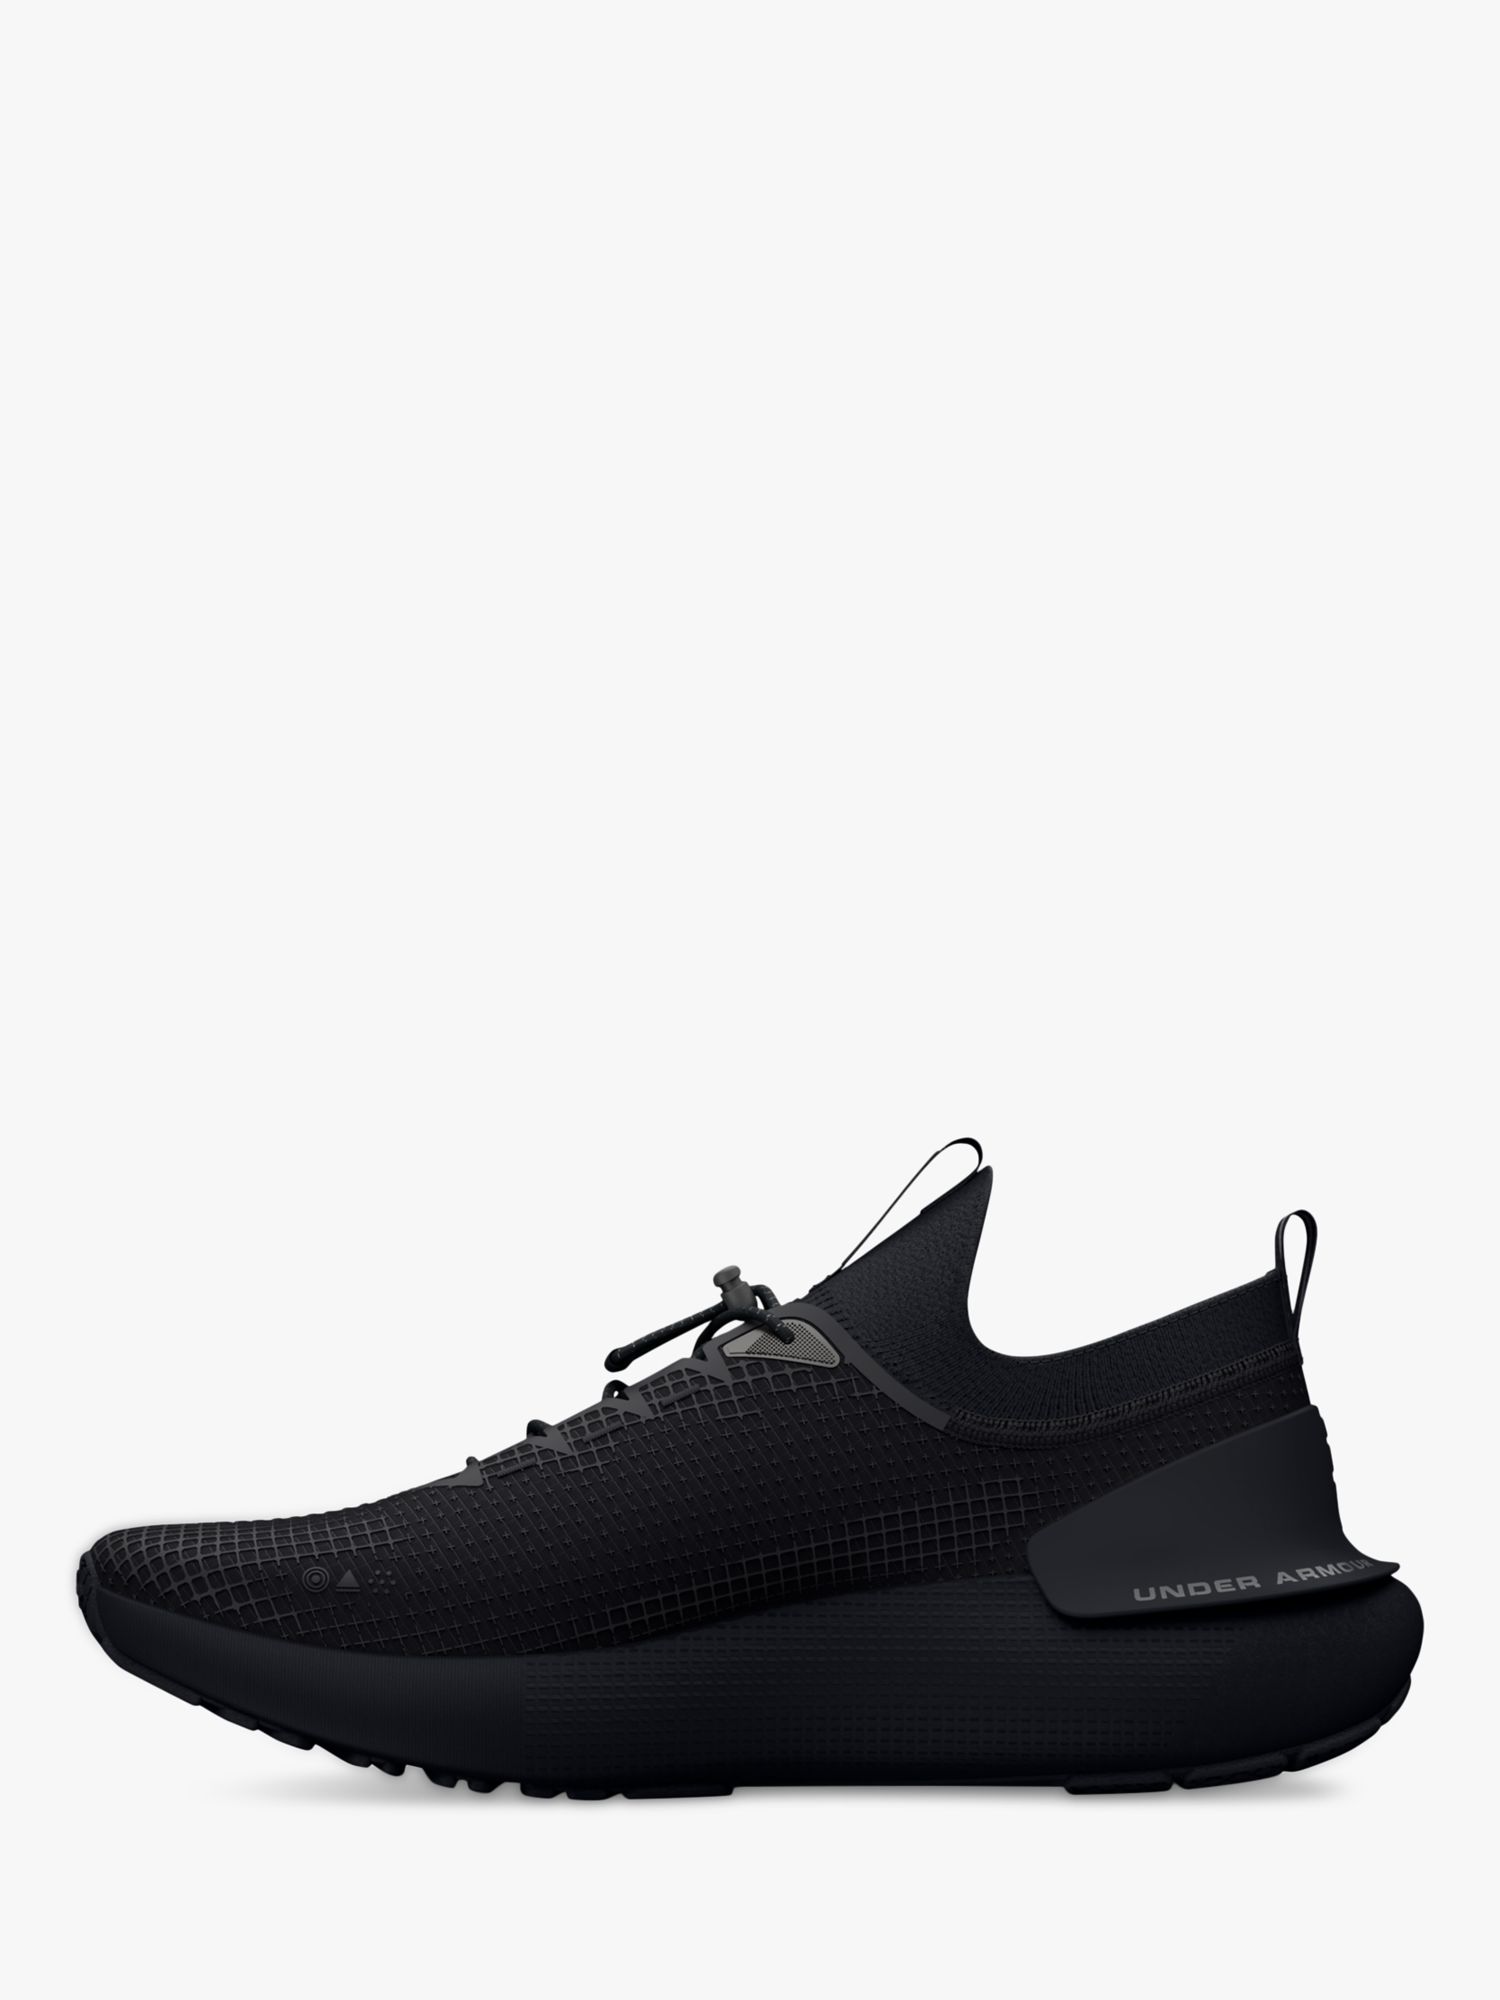 Under Armour HOVR Storm Men's Running Shoes, Black at John Lewis & Partners